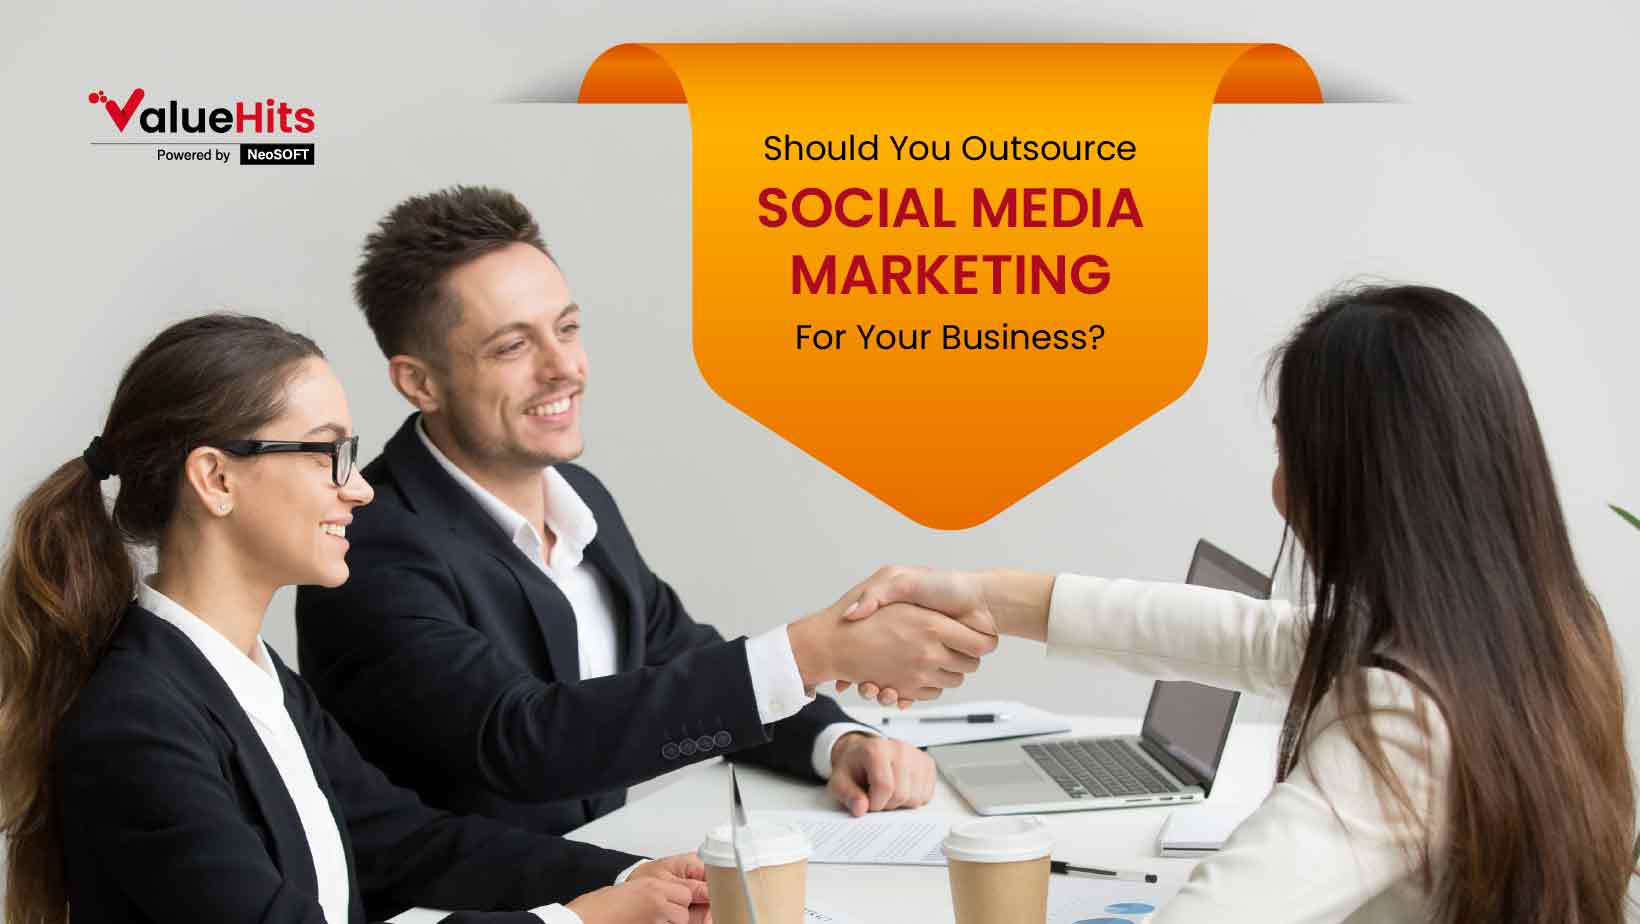 Should You Outsource Social Media Marketing For Your Business